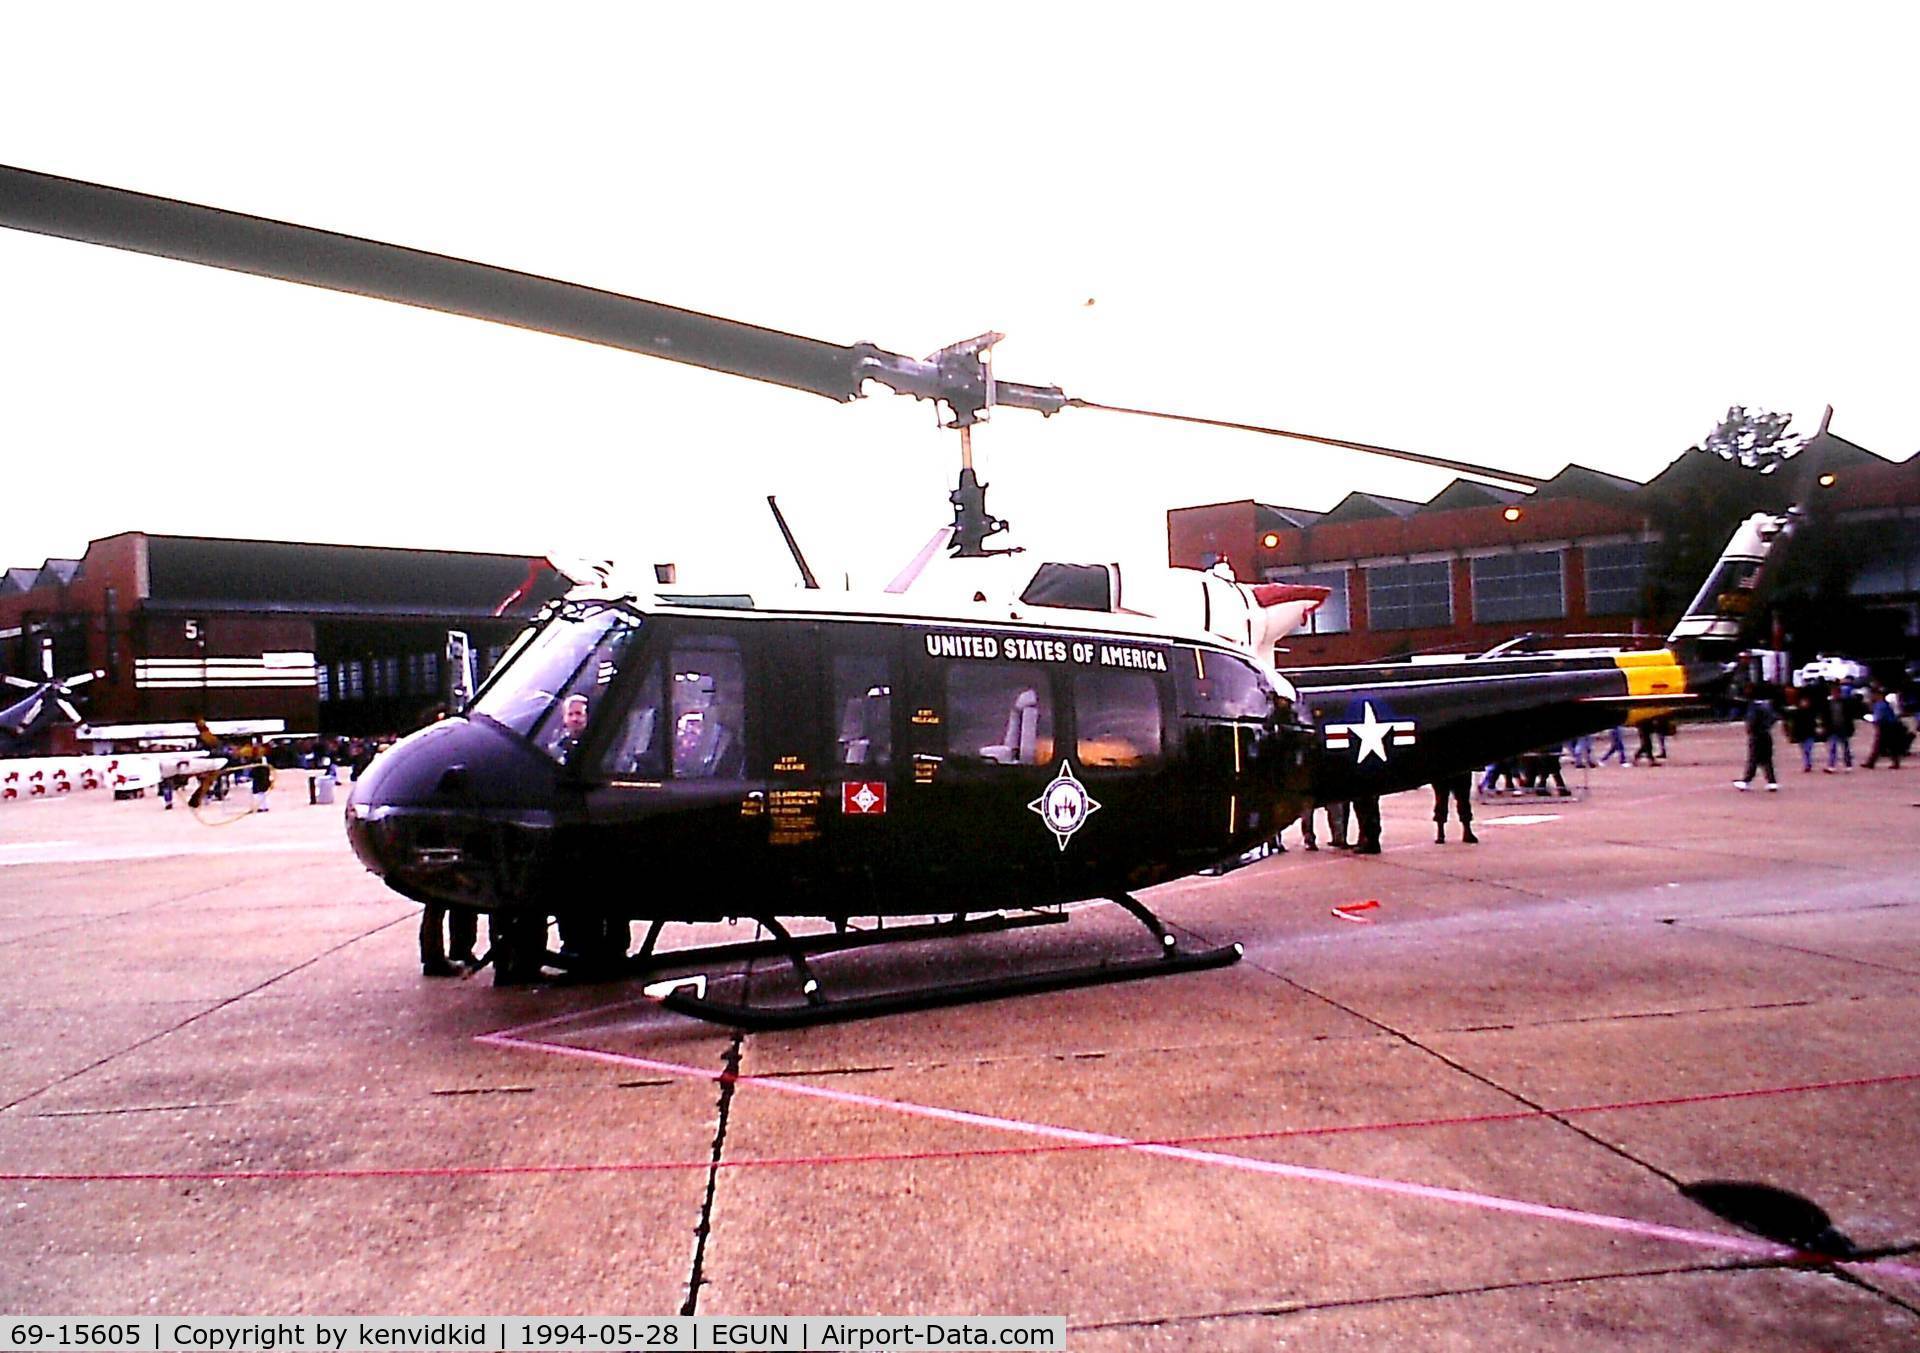 69-15605, 1969 Bell UH-1H Iroquois C/N 11893, At Air Fete 1994.